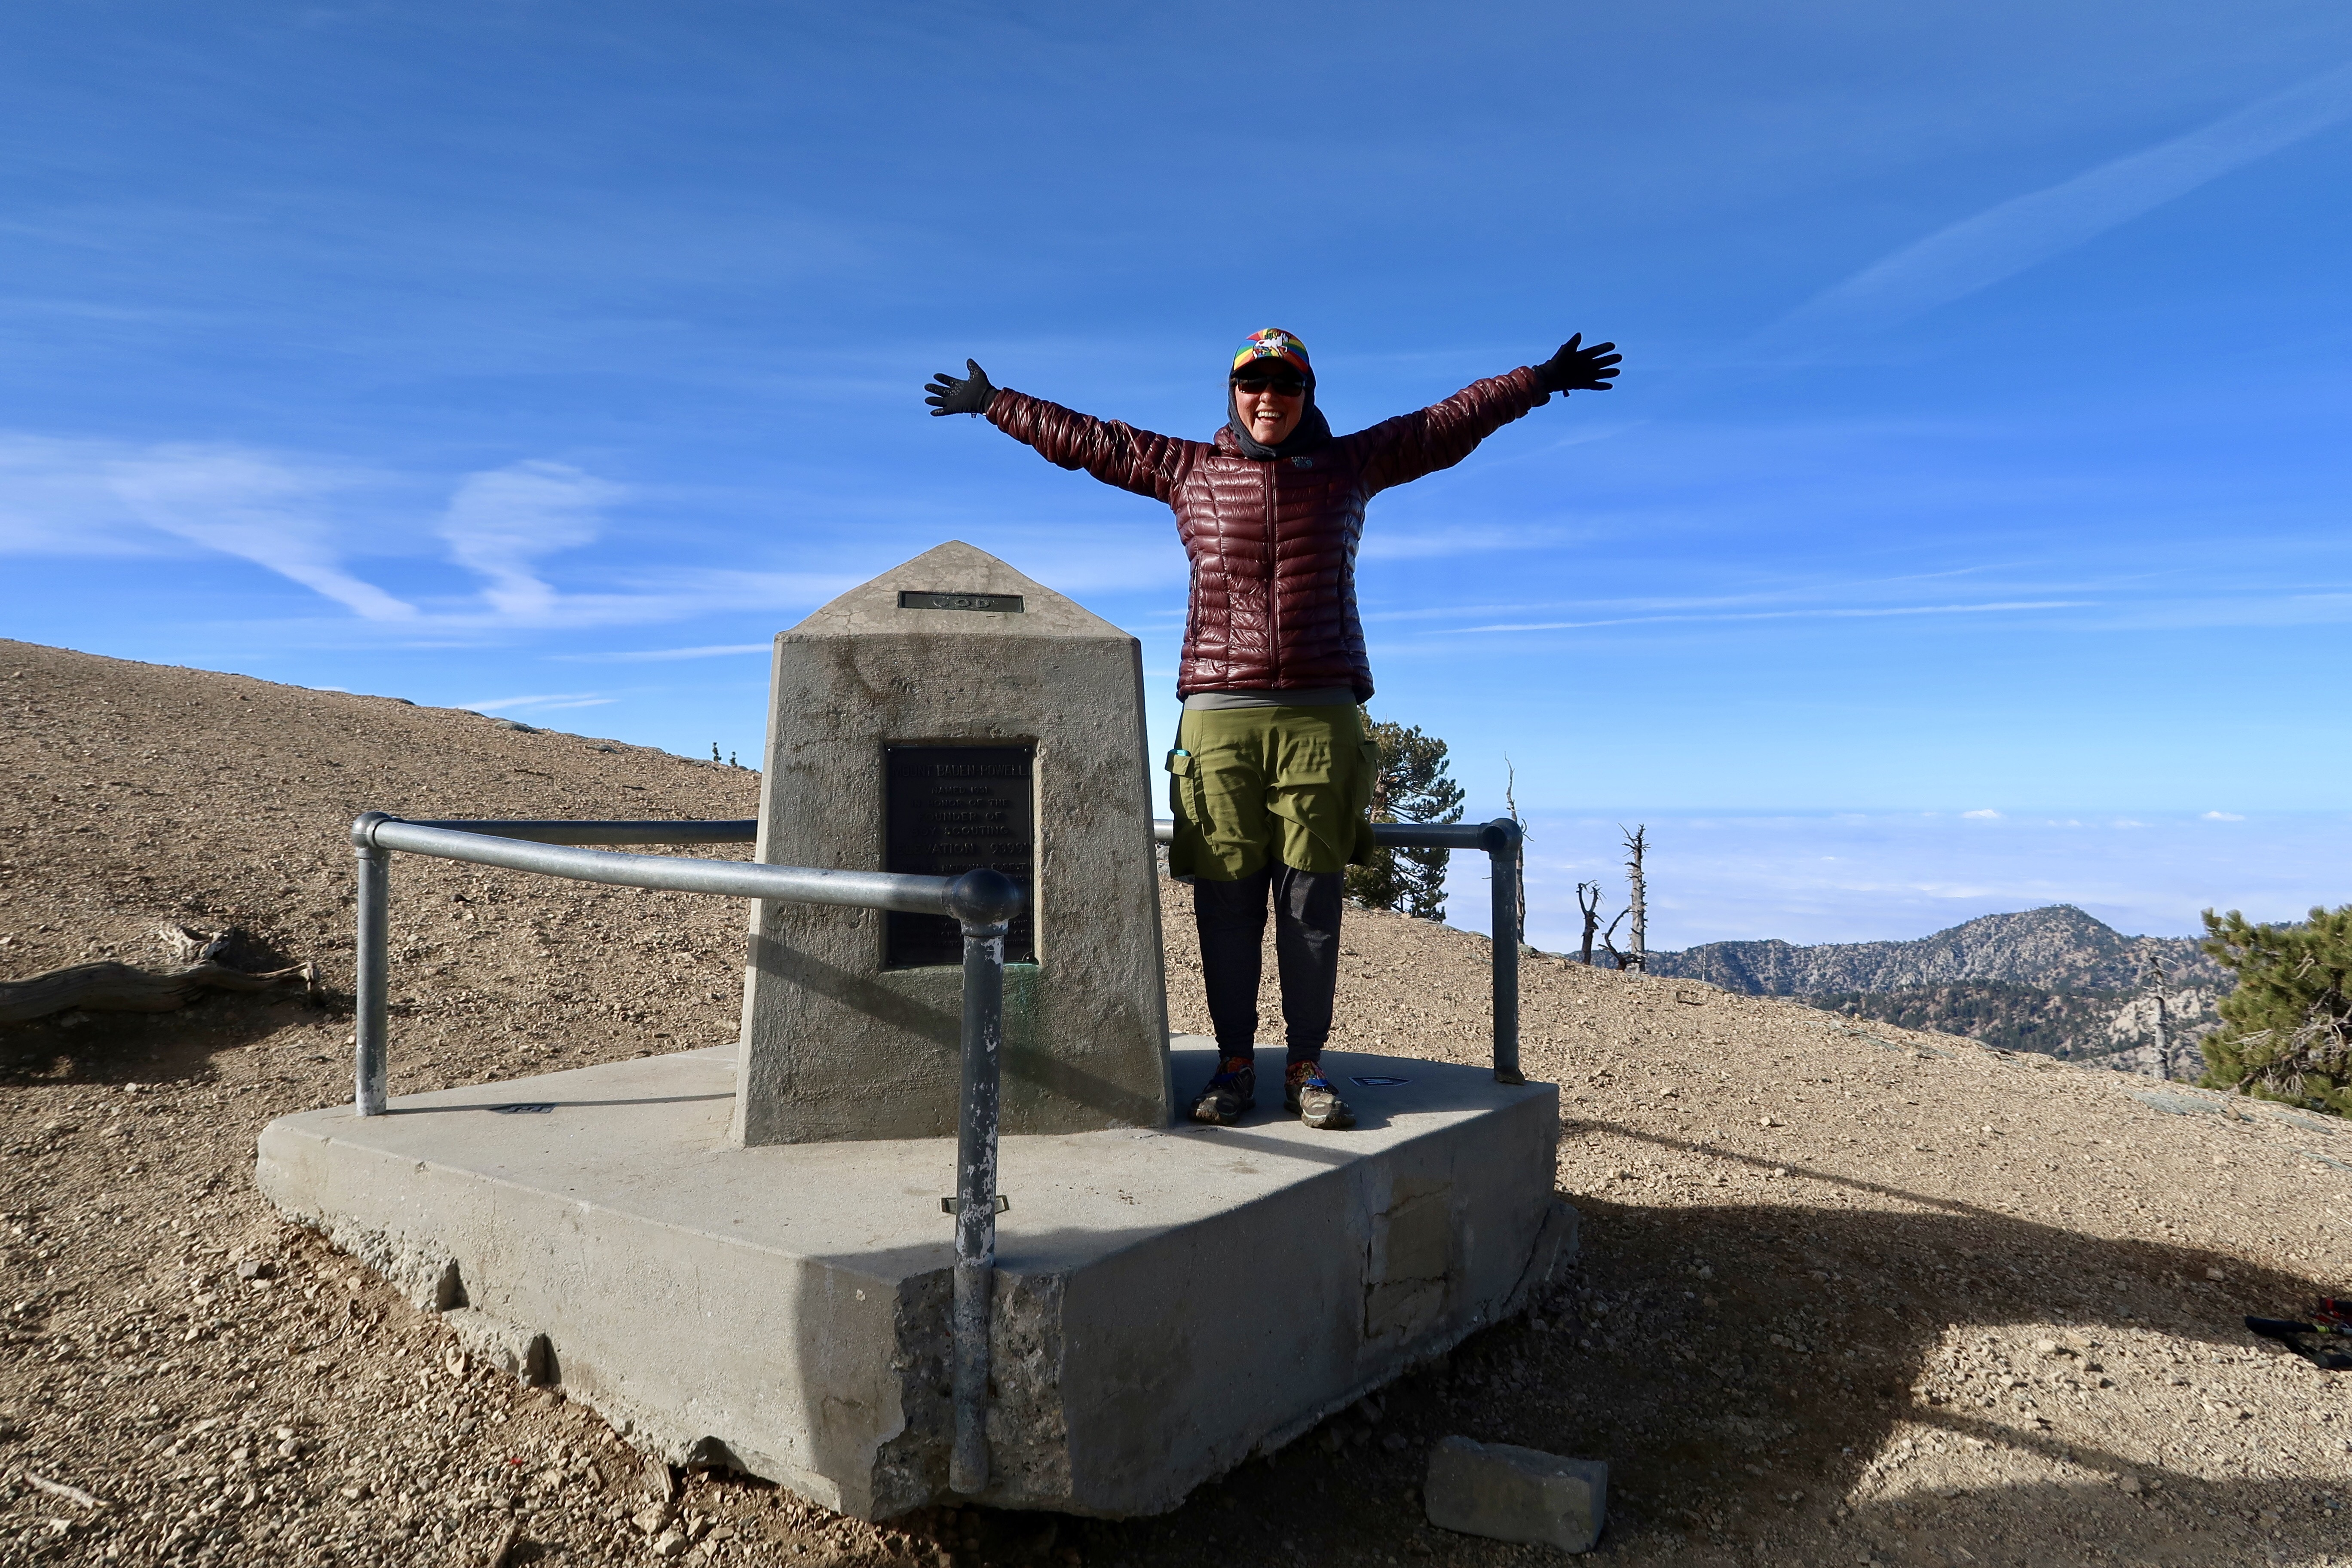 PCT Day 34 – Summiting Mt. Baden-Powell